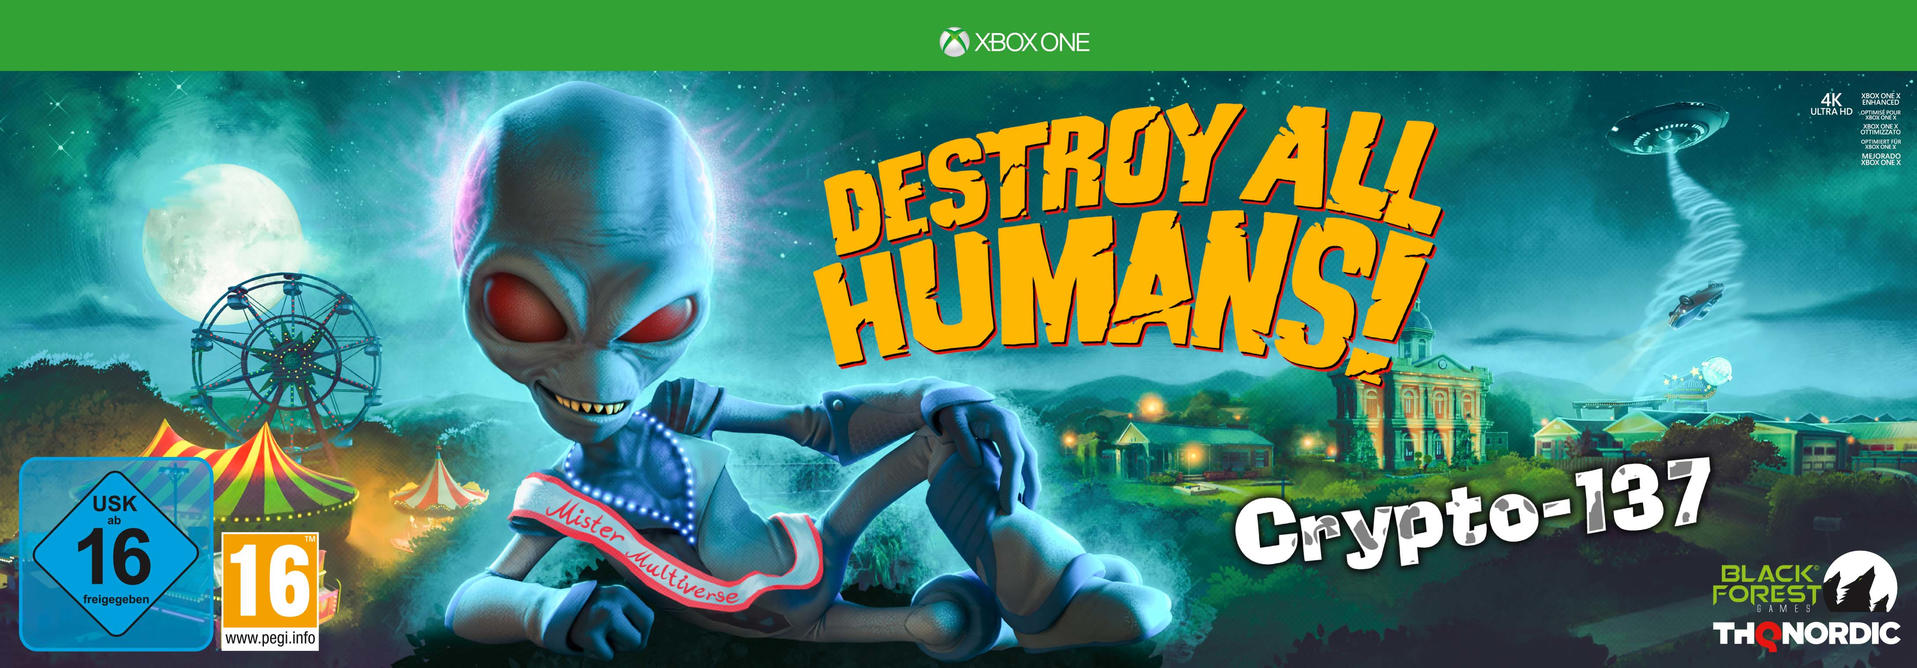 Destroy One] Crypto-137 All Edition Humans! [Xbox -